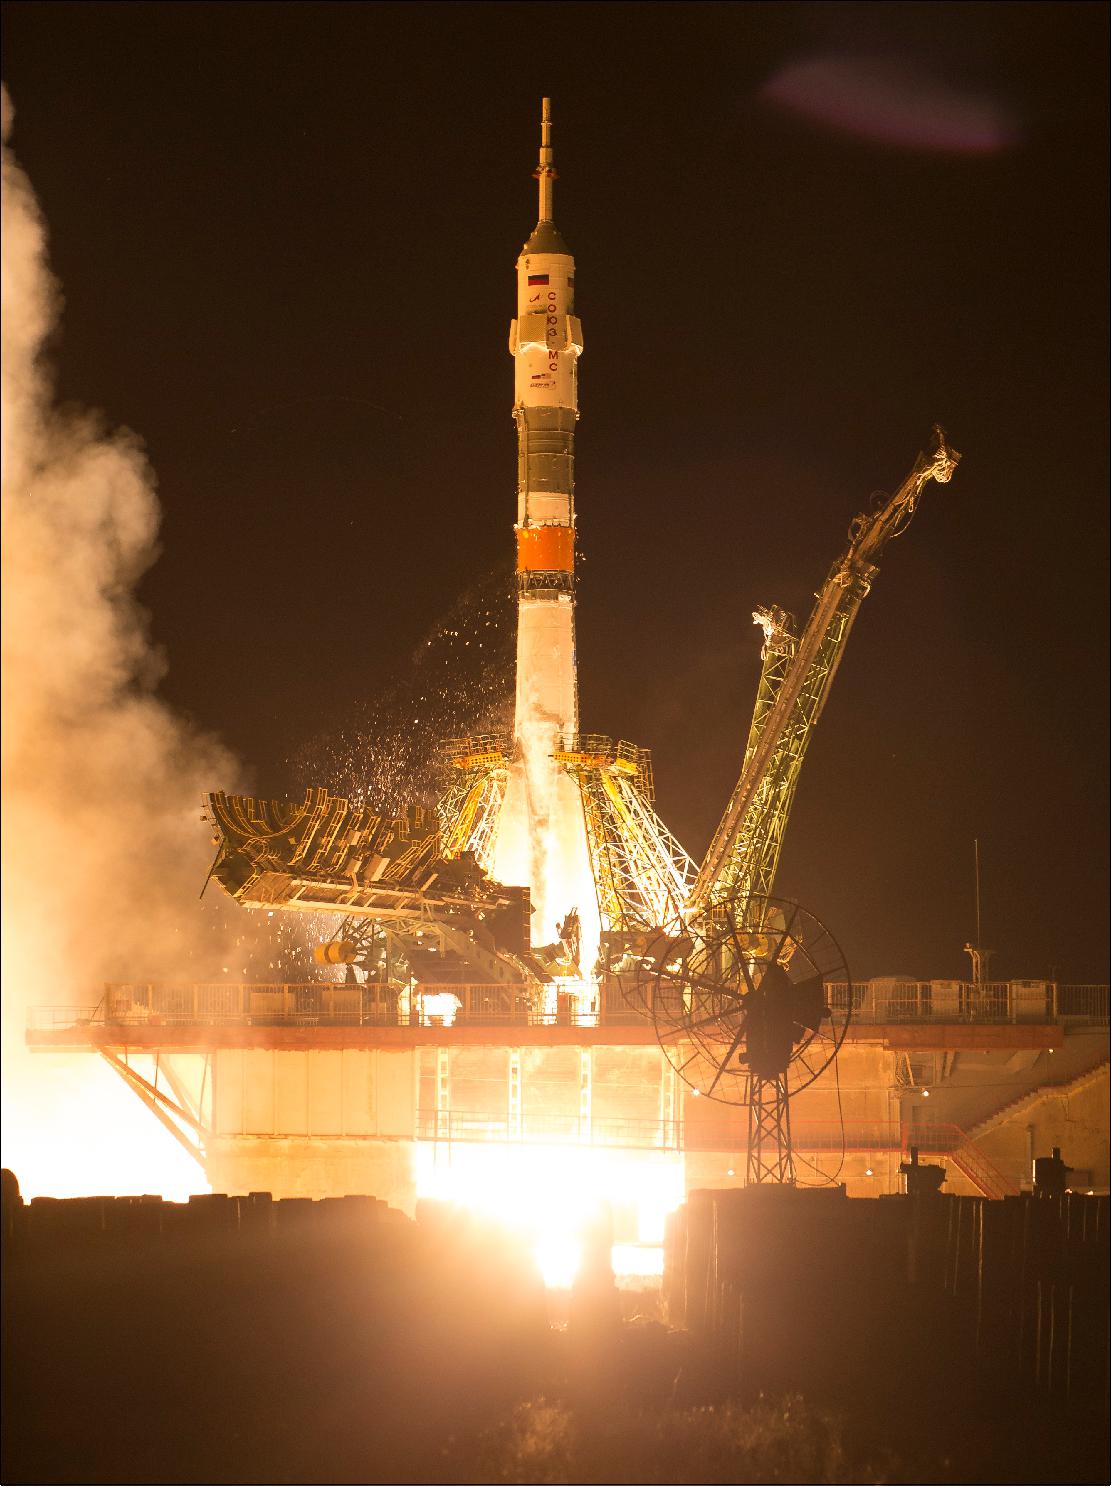 Figure 73: The Soyuz MS-13 carrying Expedition 60 Soyuz Commander Alexander Skvortsov of Roscosmos, flight engineer Drew Morgan of NASA, and flight engineer Luca Parmitano of ESA (European Space Agency), launches at 12:28 p.m. EDT (9:28 p.m. Baikonur time) Saturday, July 20, 2019, from the Baikonur Cosmodrome in Kazakhstan (image credit: NASA/Joel Kowsky)